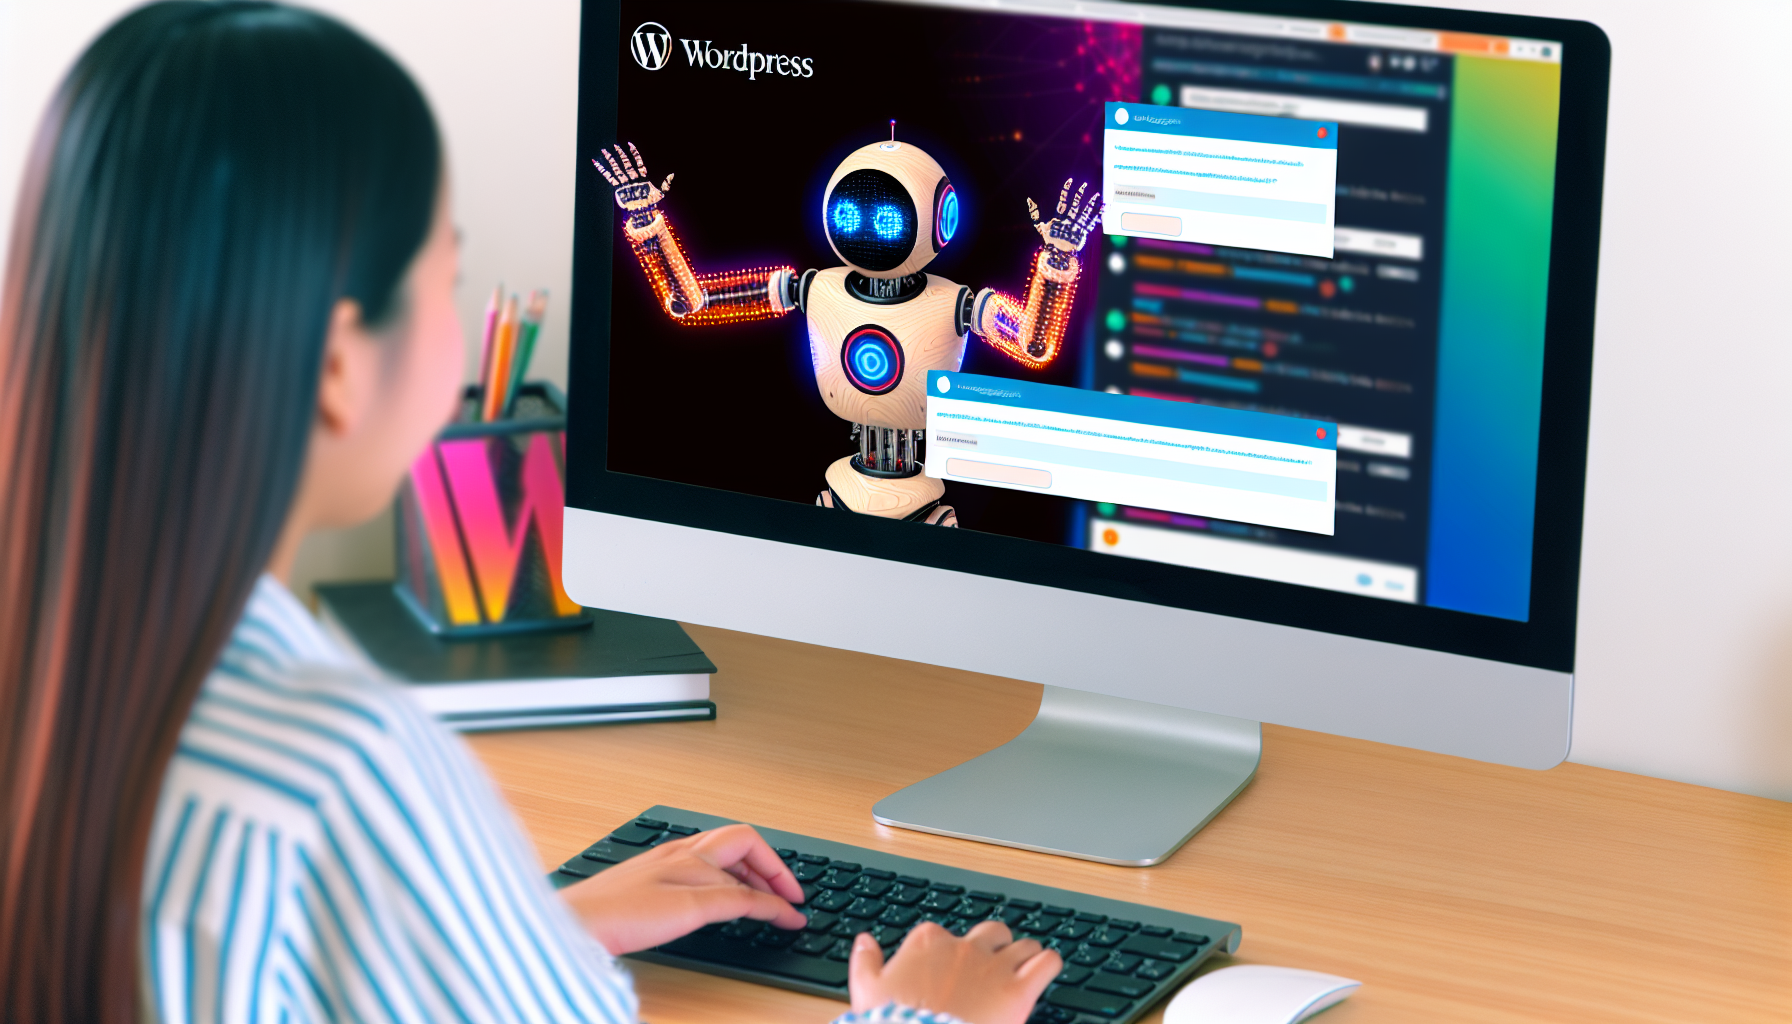 An AI chatbot interacting with a user on a WordPress site